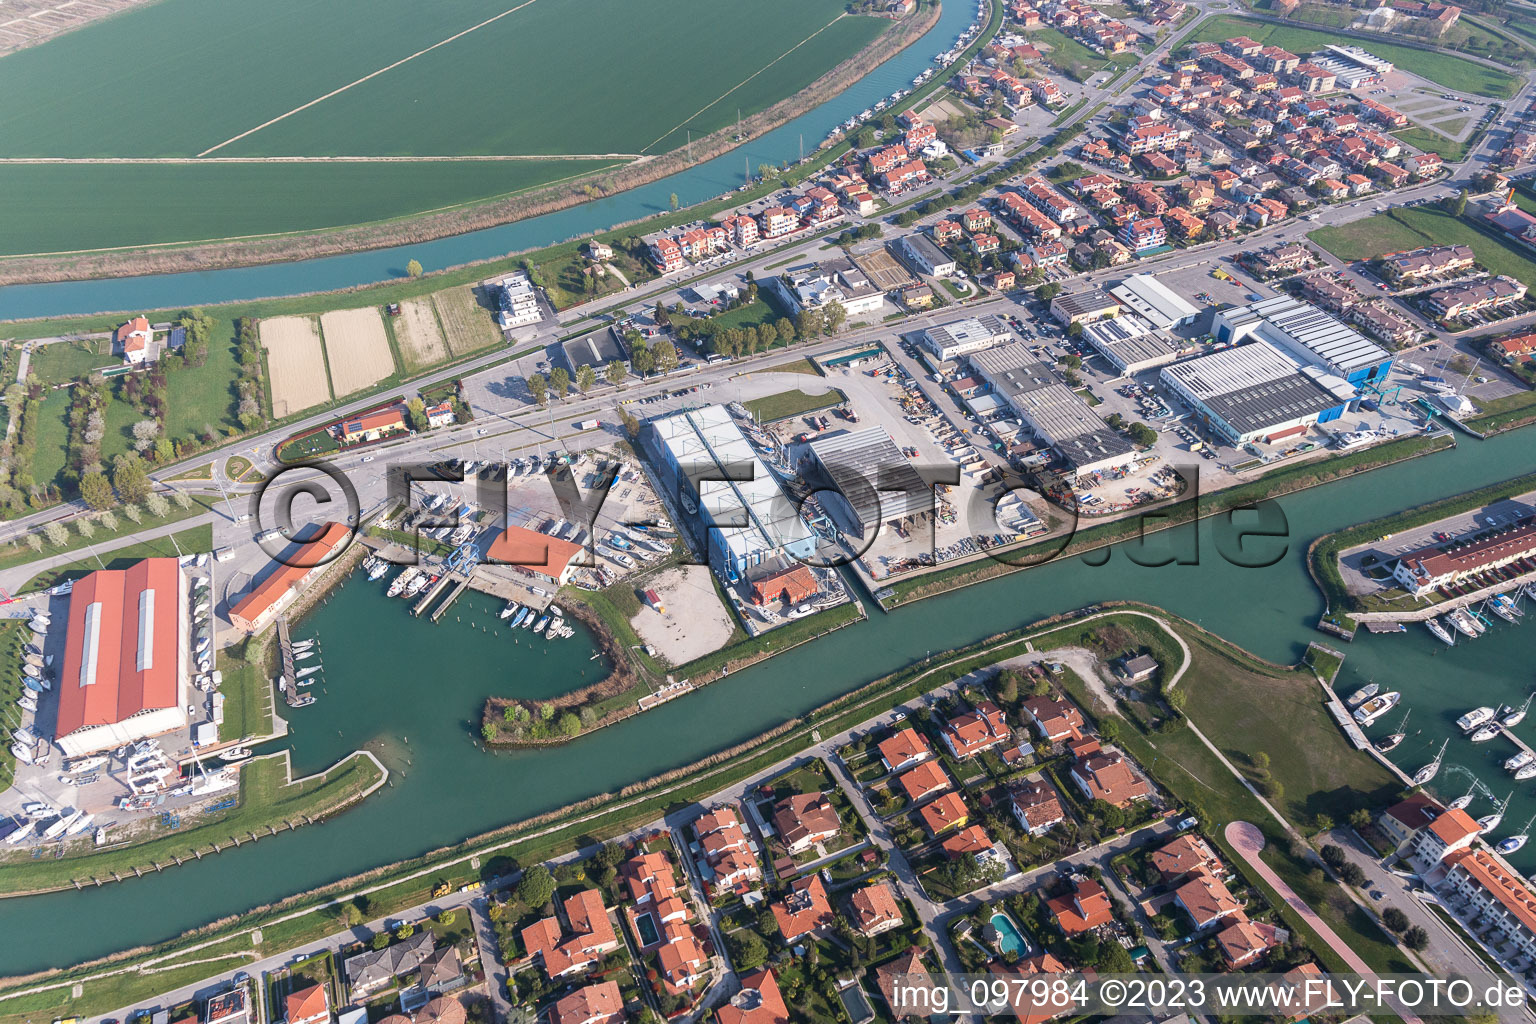 Aerial view of Caorle in the state Veneto, Italy